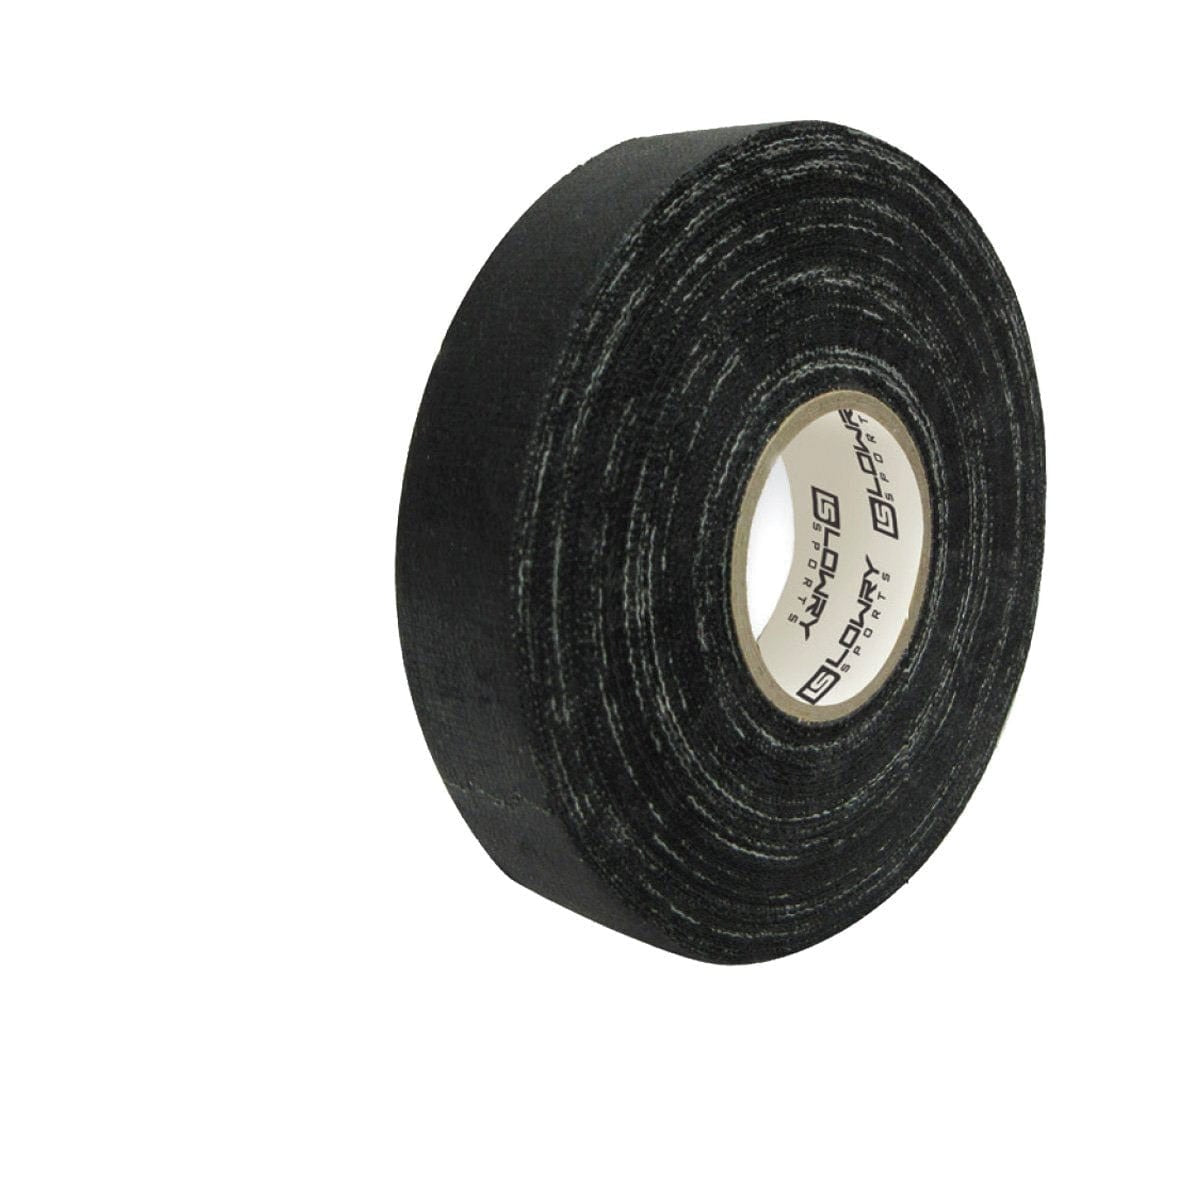 Lowry Sports Black Friction Tape